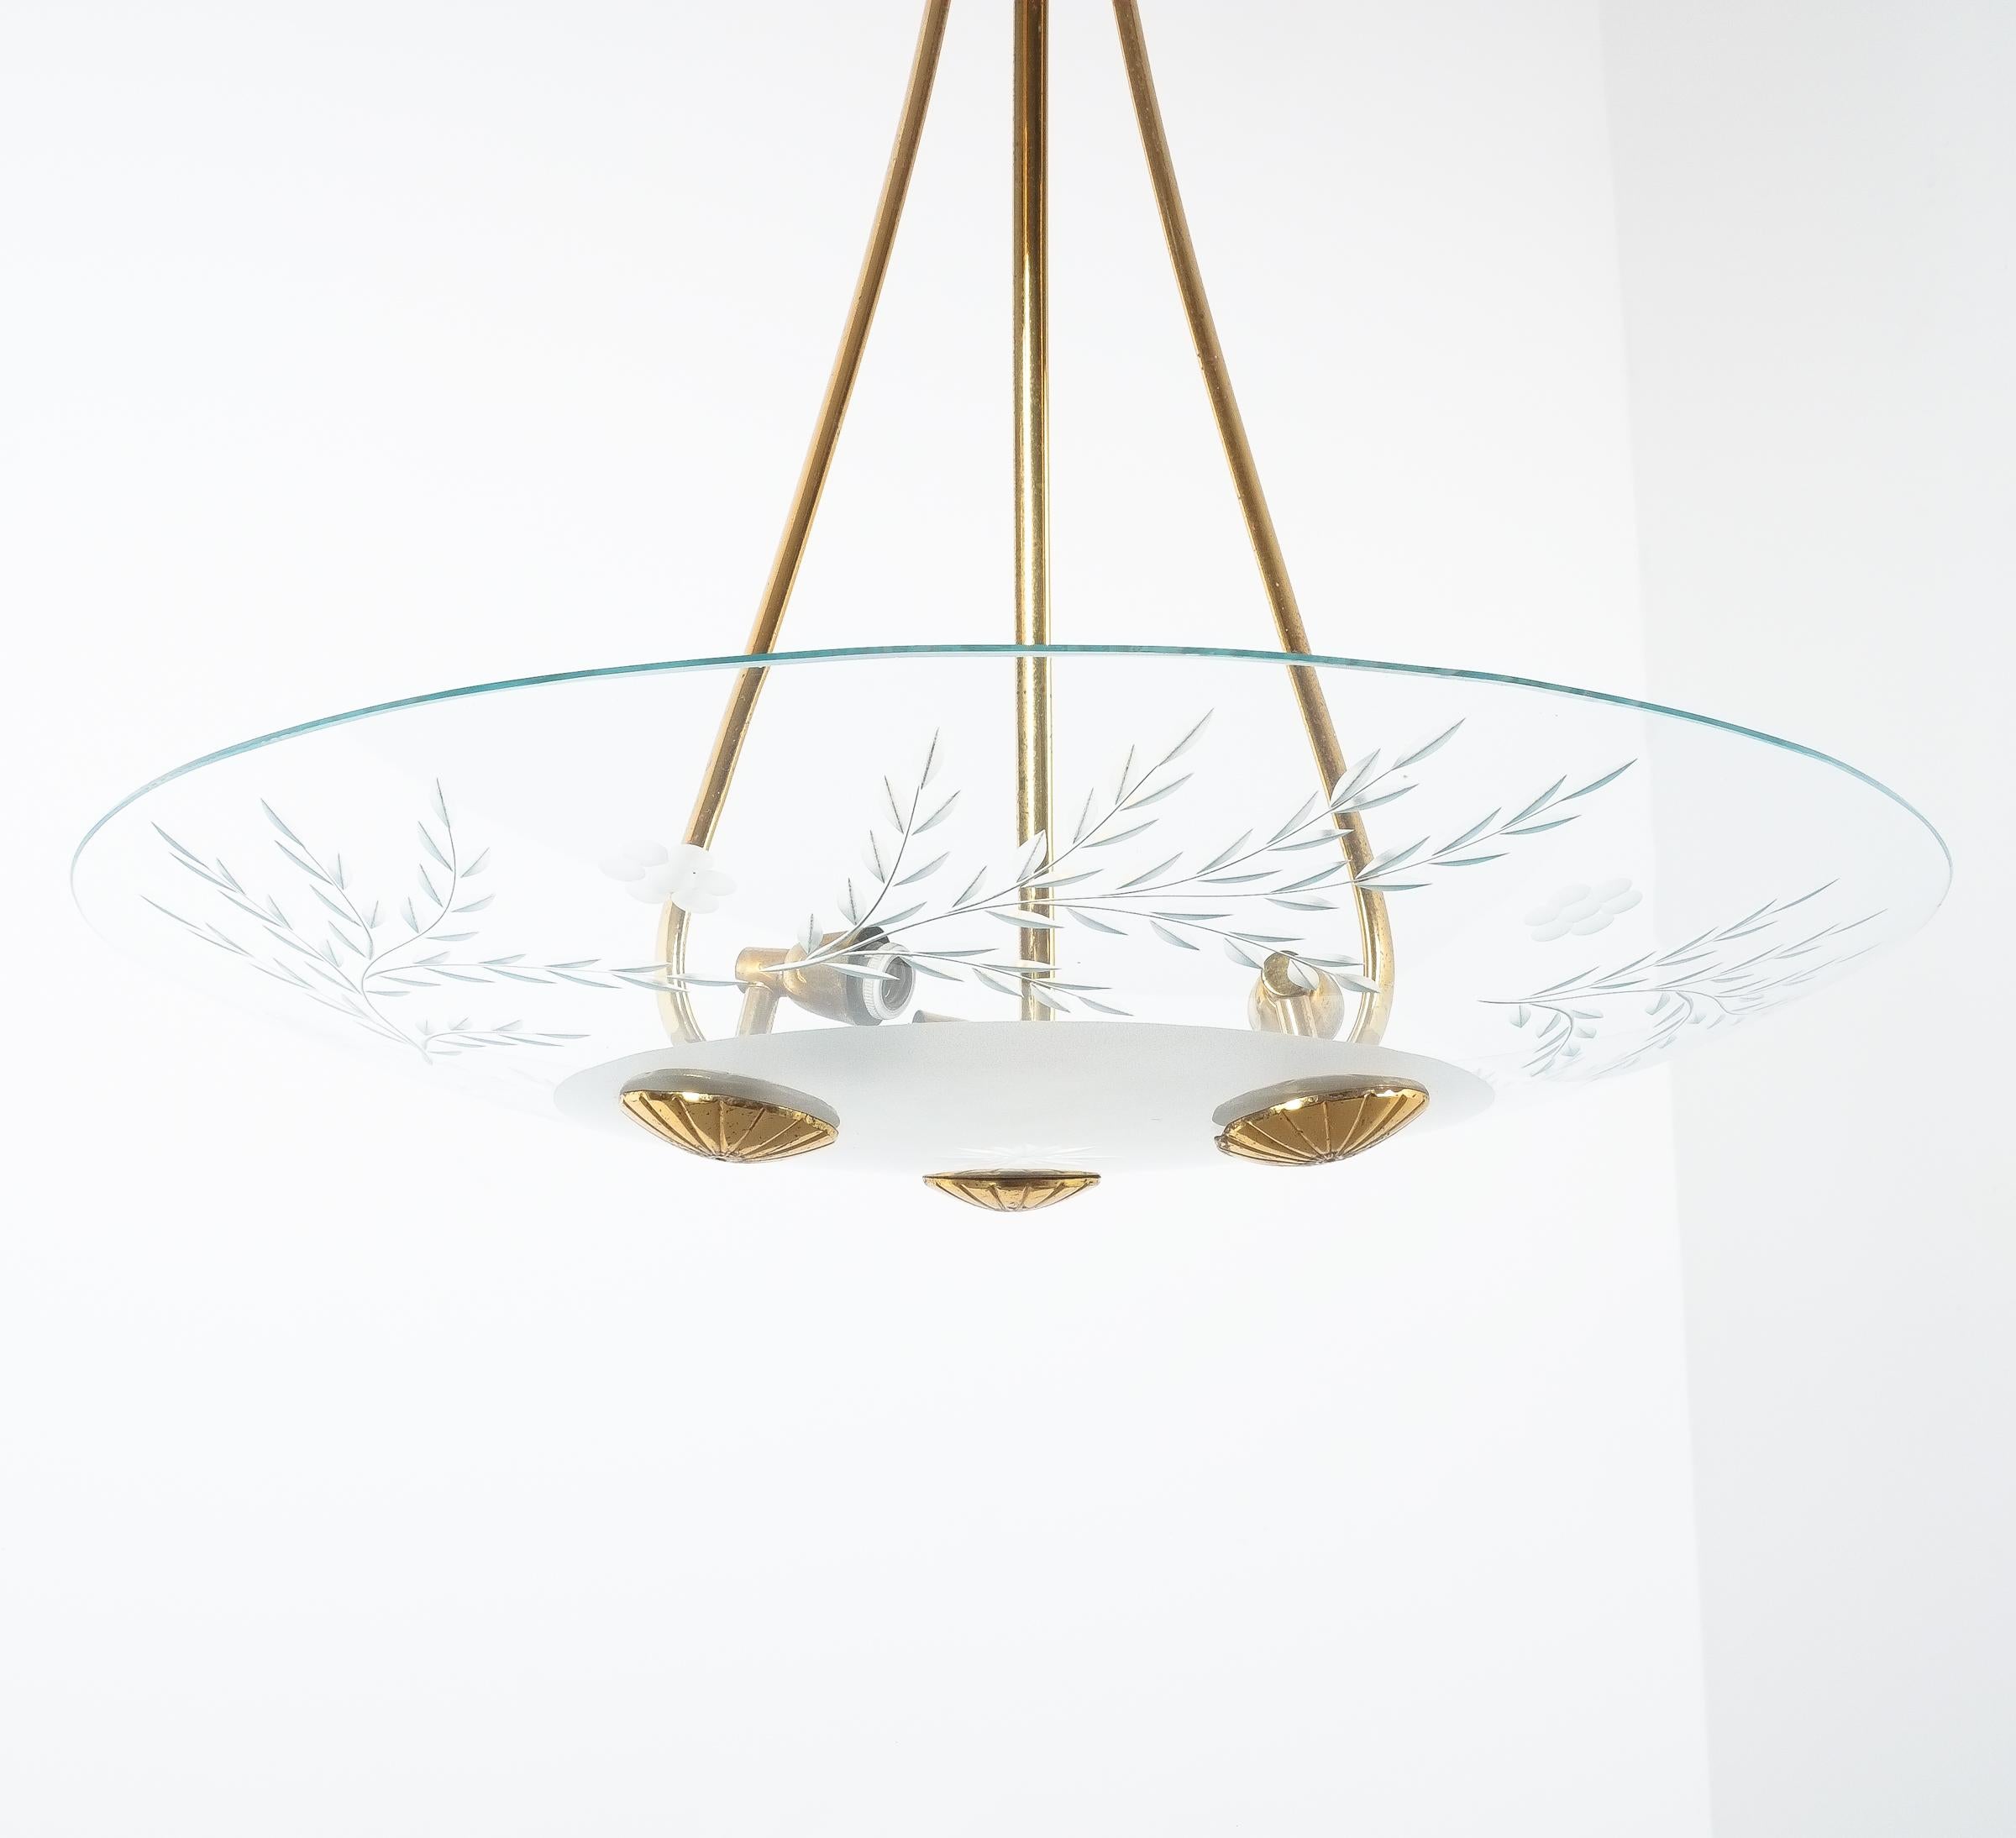 Glass chandelier or low hanging semi flush mount, attributed to Luigi Brusotti, circa 1945, Italy

Midcentury 21.65